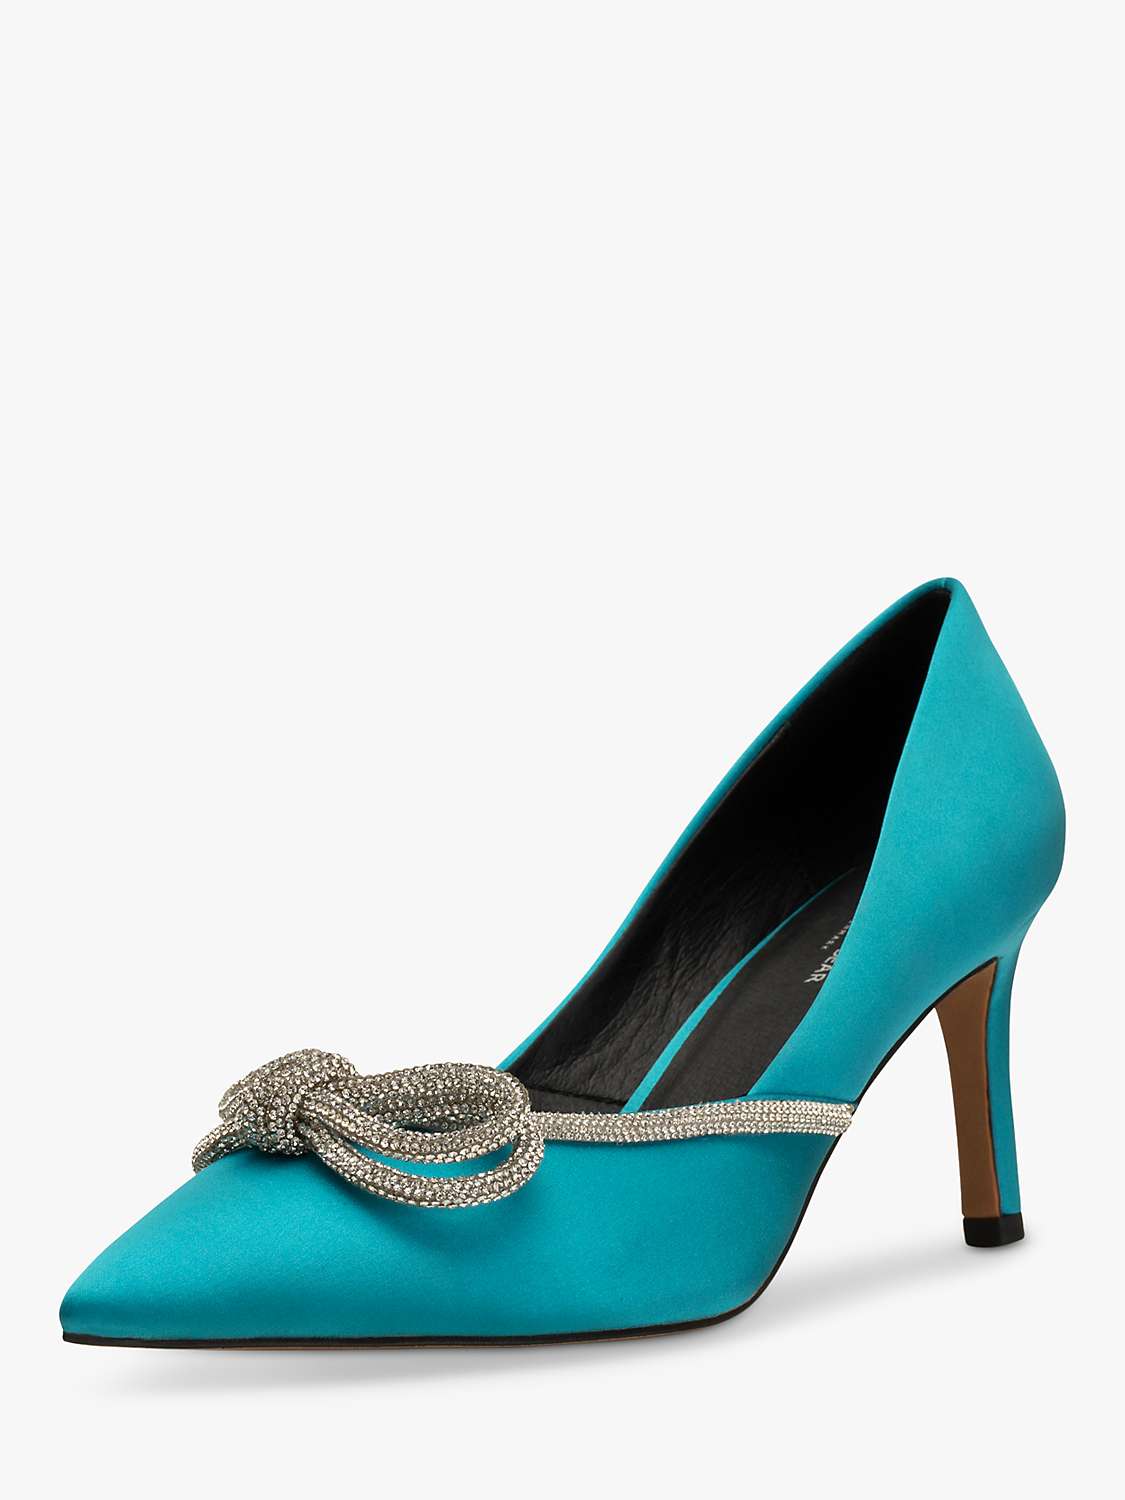 SHOE THE BEAR Harper Bow Satin Court Shoes, Turquoise at John Lewis ...